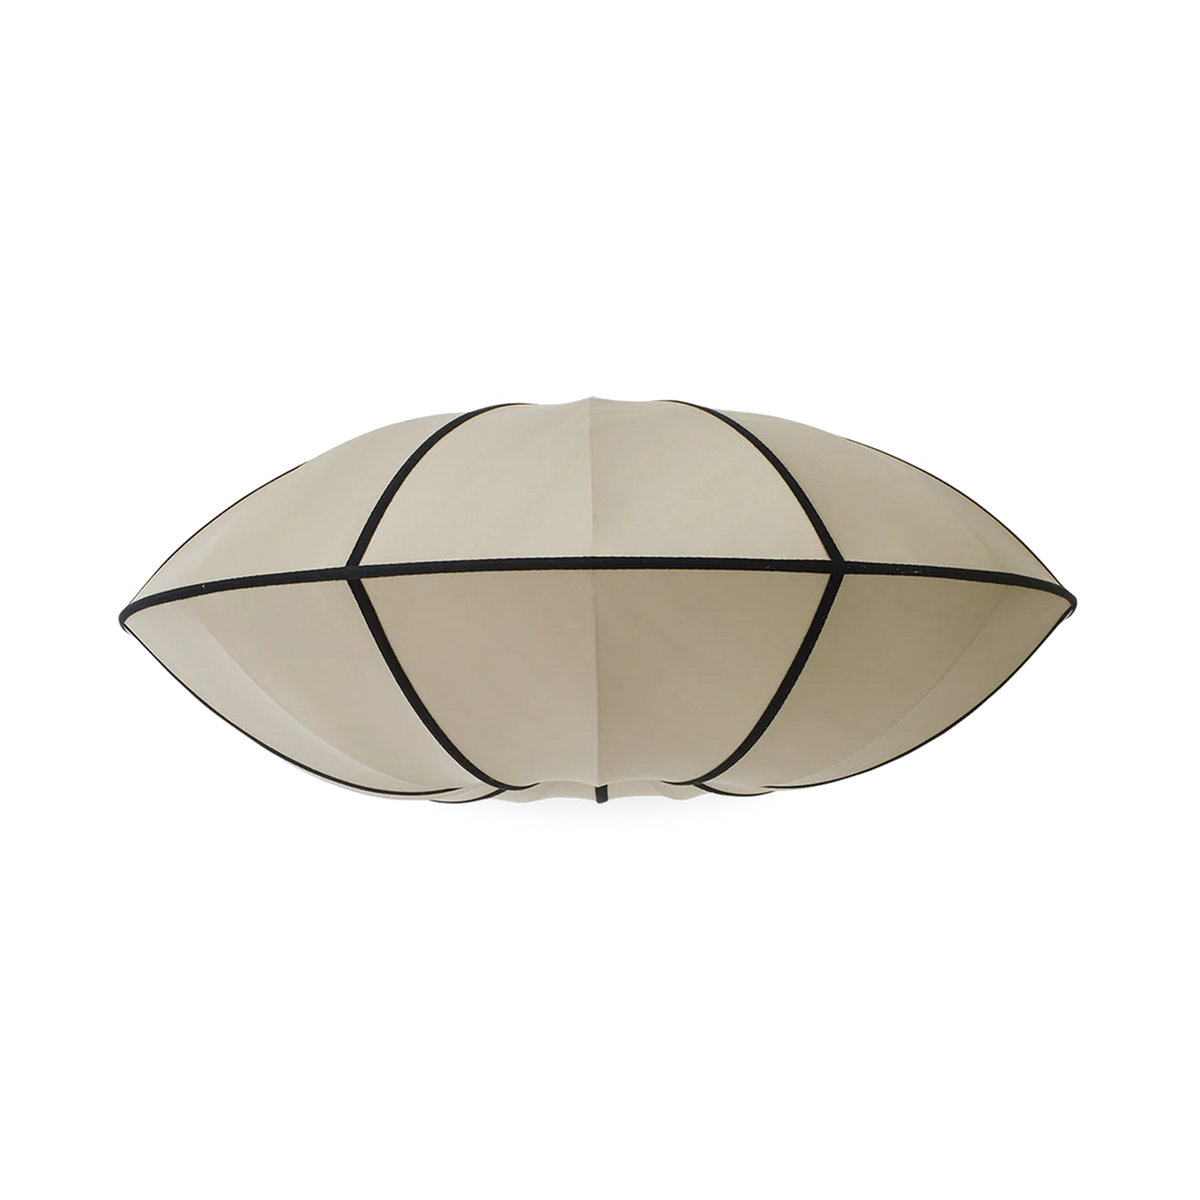 Made in Vietnam from real silk the Silk Shade Ribbon UFO uses its sleek Scandinavian design to light up any room.